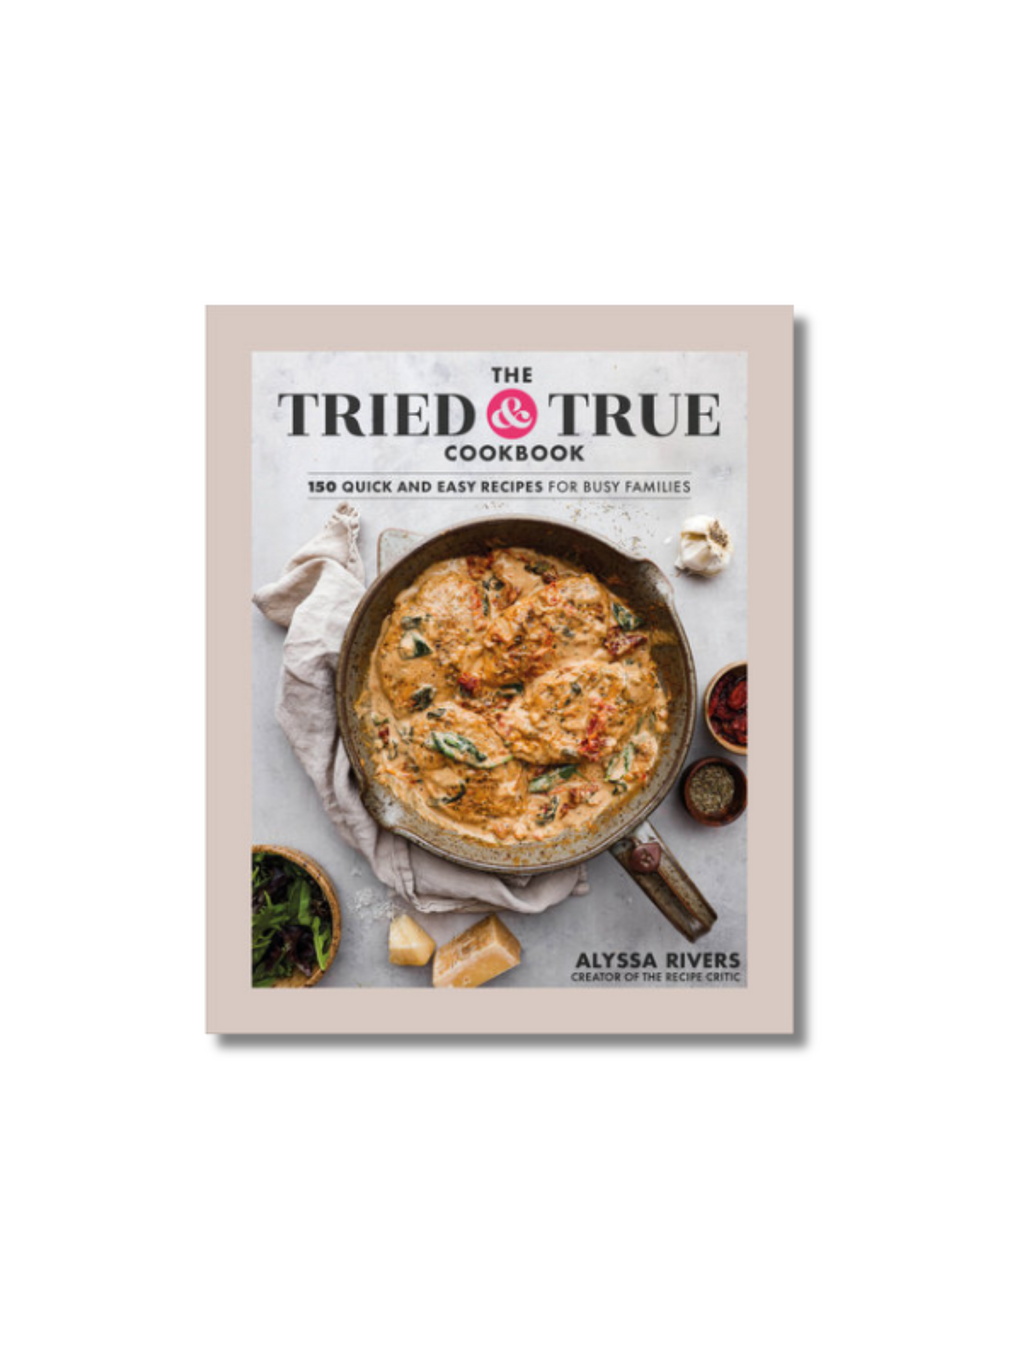 The Tried & True Cookbook: 150 Quick and Easy Recipes for Busy Families